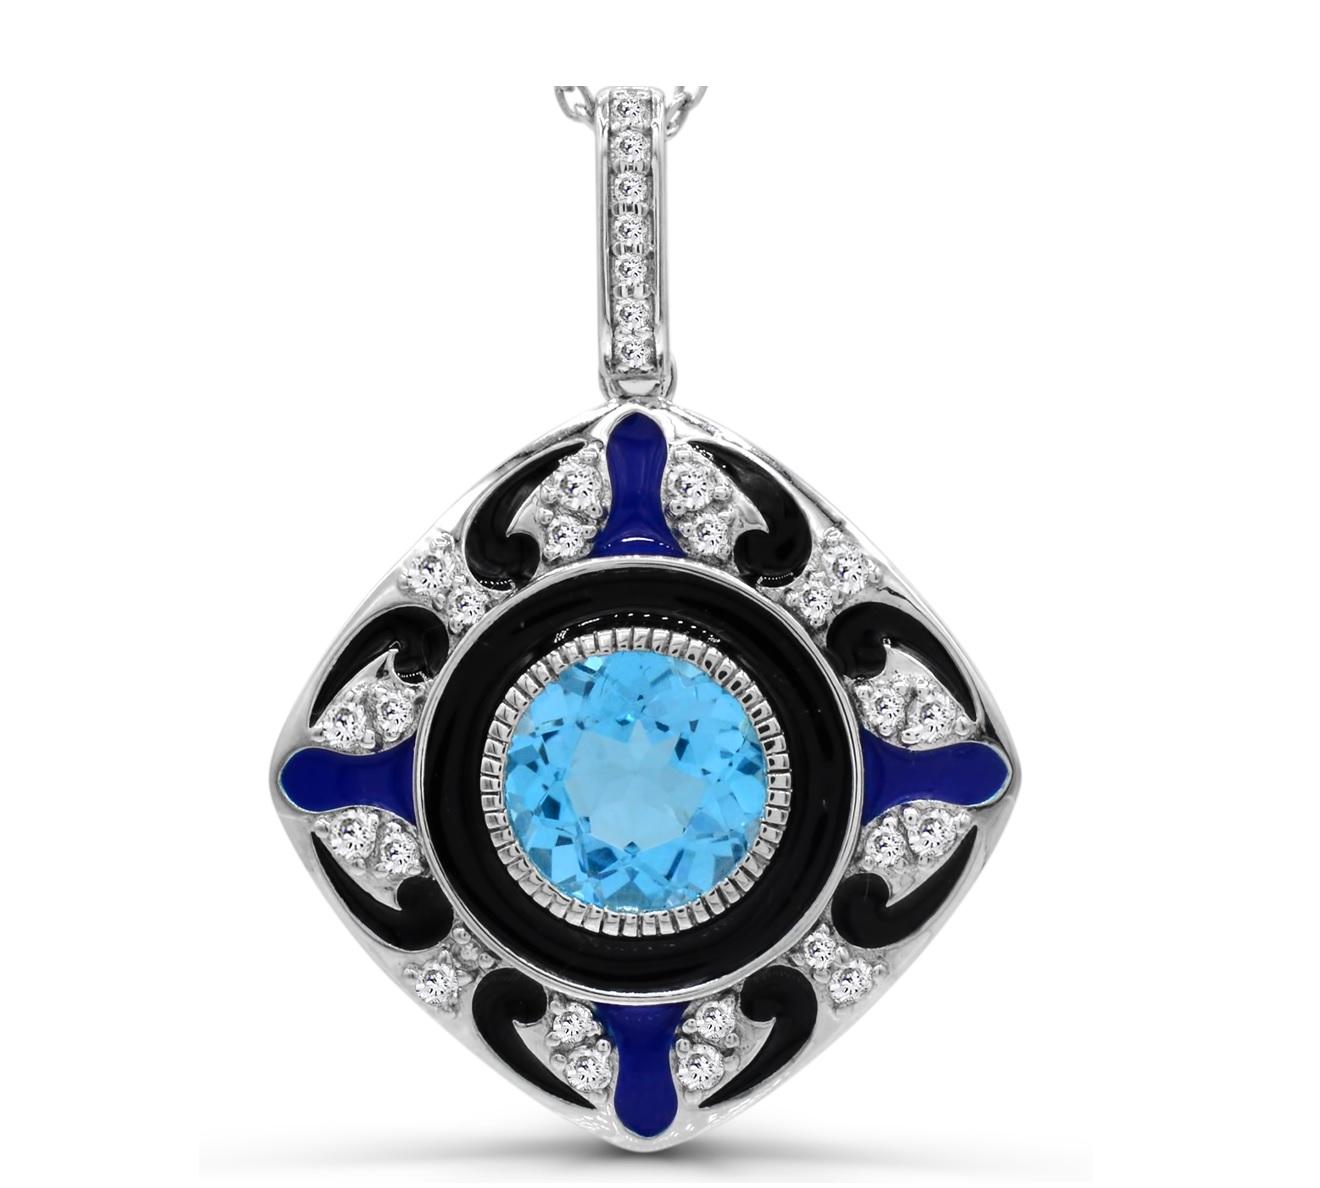 Indulge in the elegance of our Swiss Blue Topaz & White Topaz Black/Blue Enamel Accented Pendant Necklace in Sterling Silver. Crafted with meticulous attention to detail, this necklace boasts a stunning combination of one round Swiss blue topaz